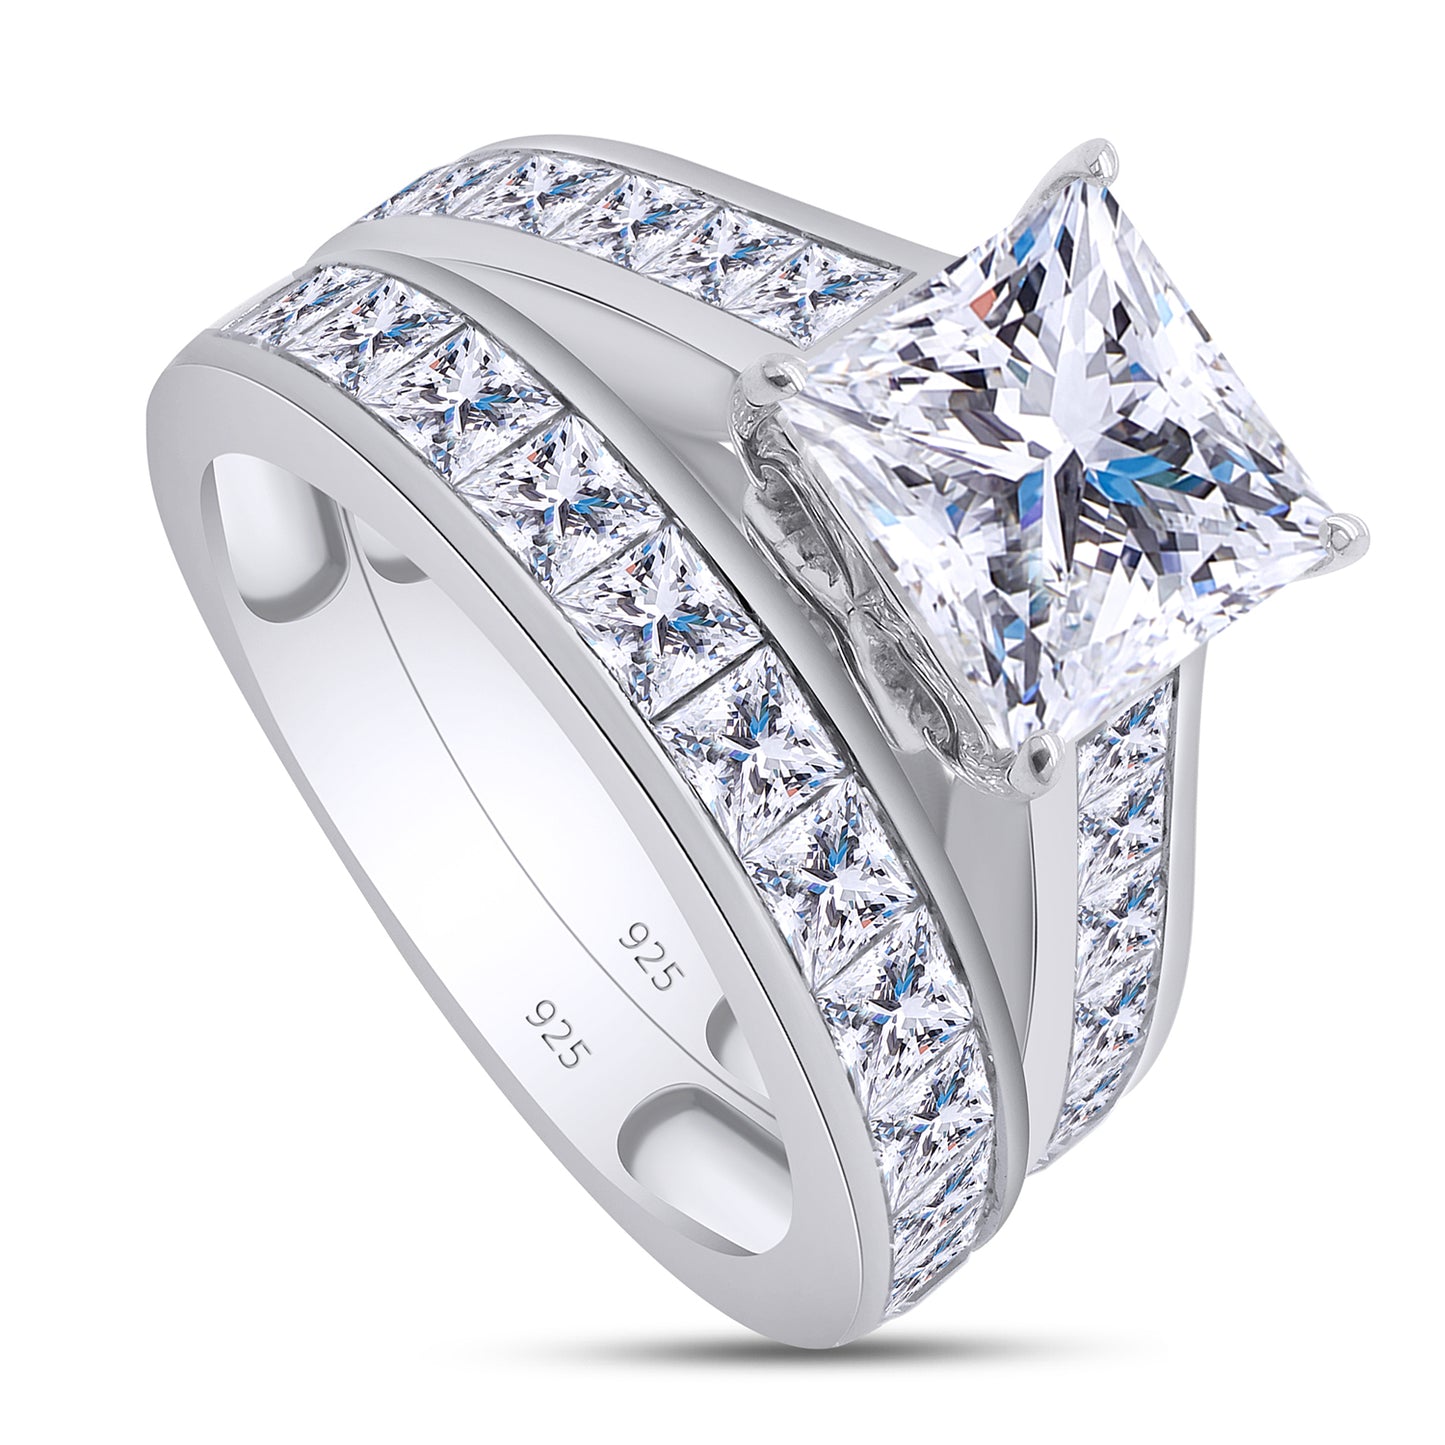 4 Carat Princess Cut Lab Created Moissanite Diamond Wedding Bridal Set Ring For Womens  In 925 Sterling Silver